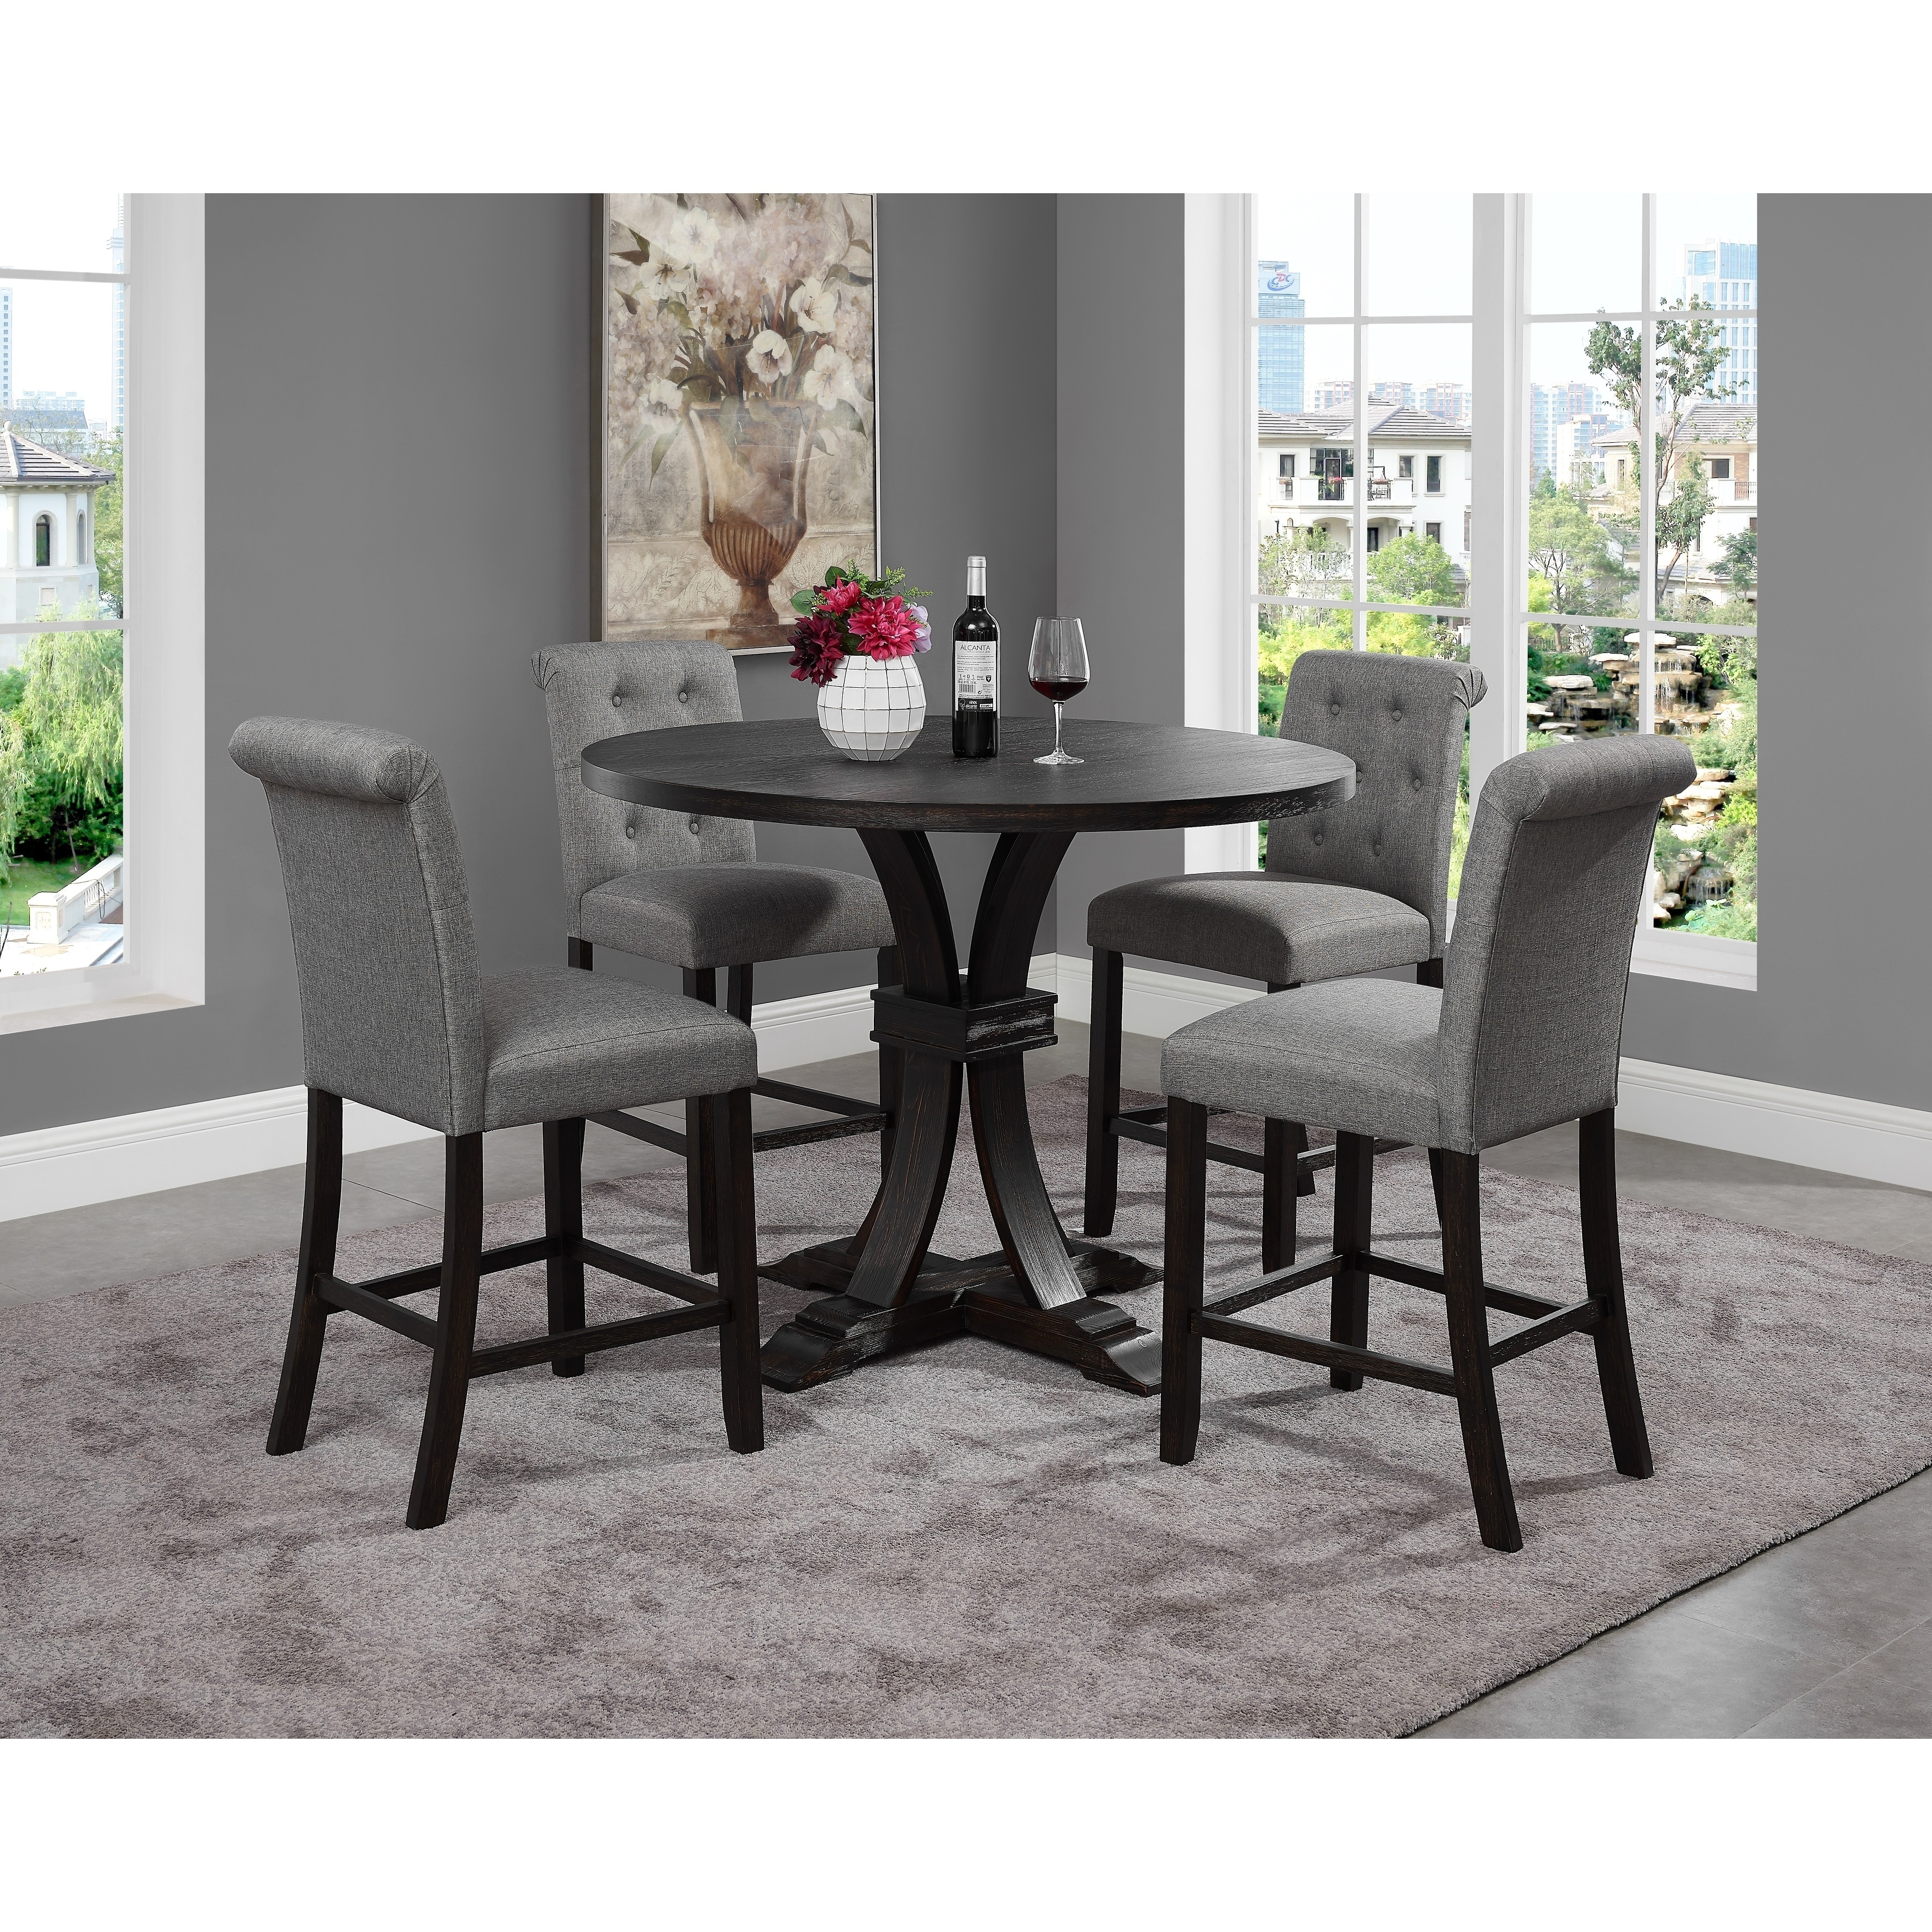 Siena Distressed Black Finish 5 Piece Counter Height Dining Set Pedestal Round Table With 4 Chairs 33054a96 F512 460e B02c D8c59a02323c 